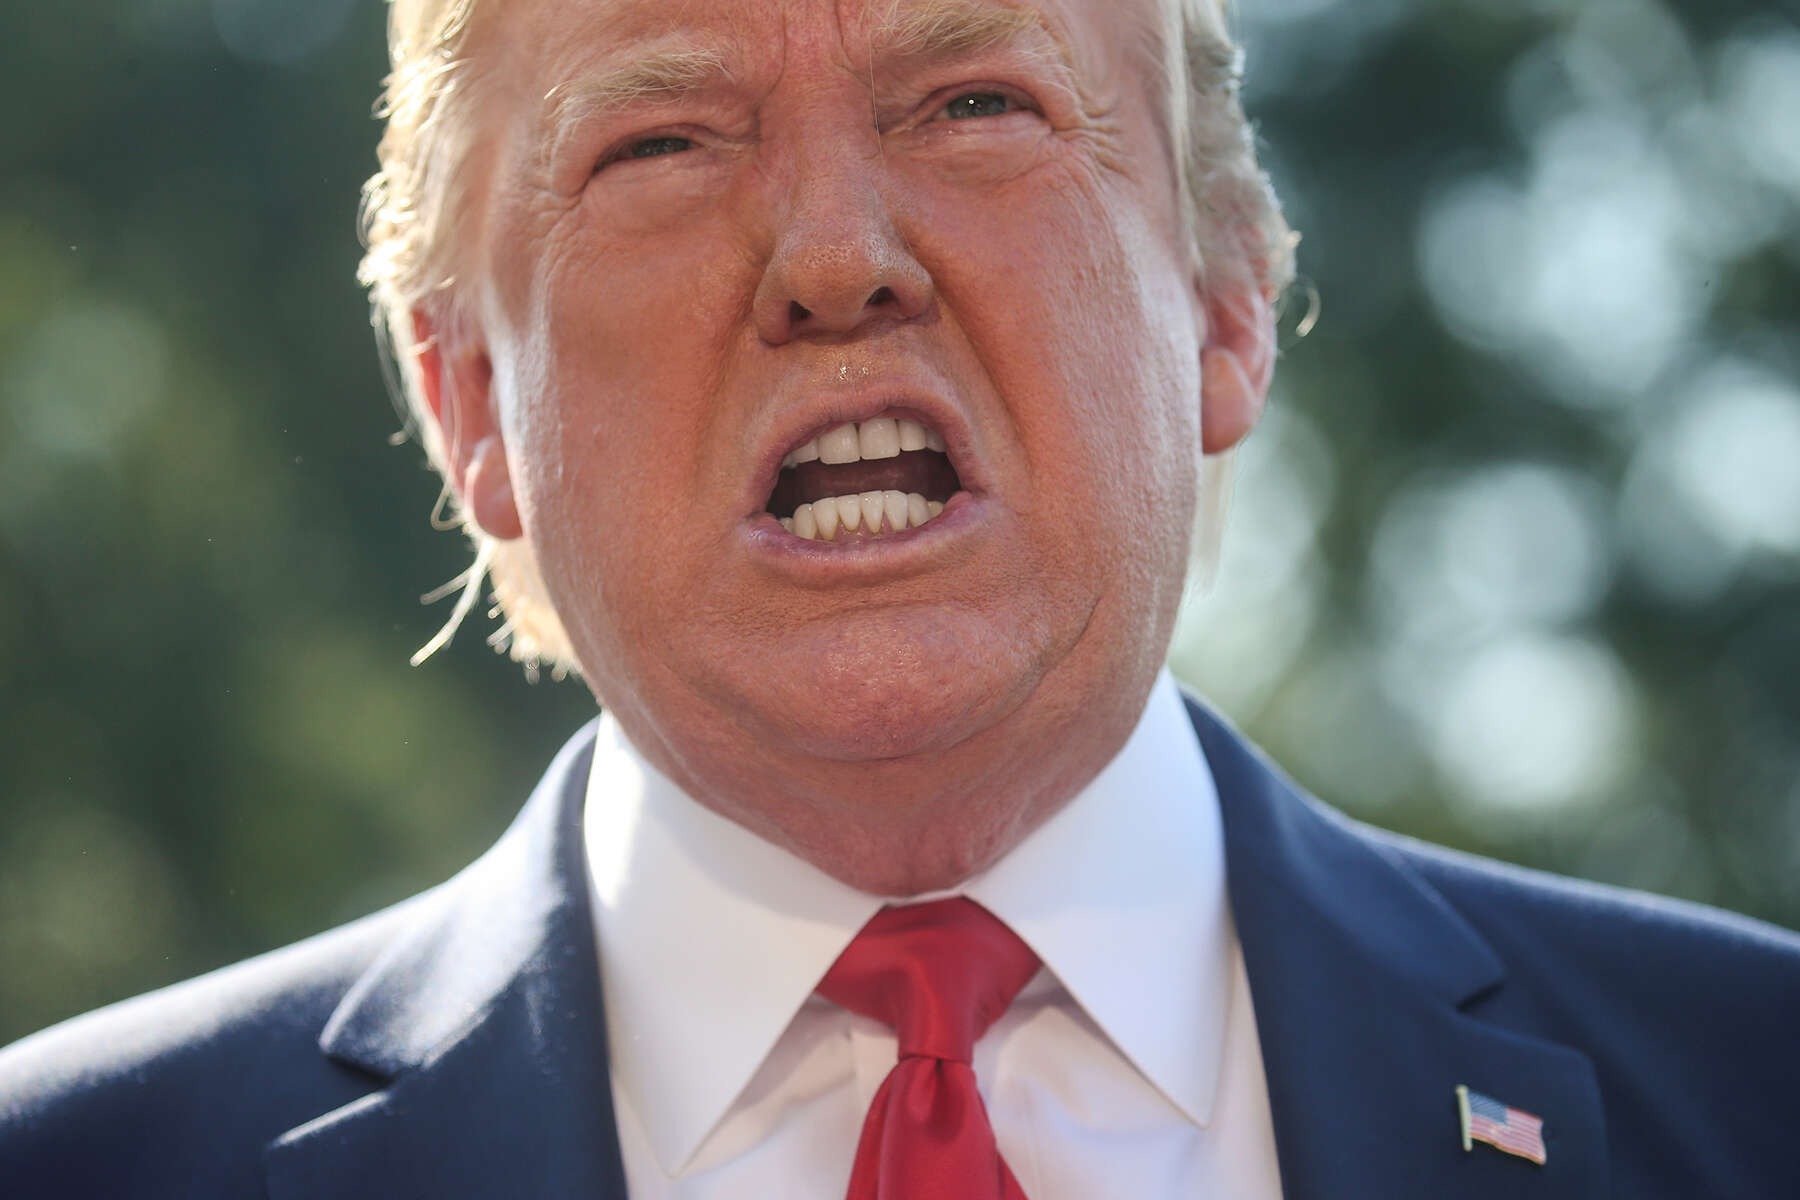 U.S. President Donald Trump talks to reporters as he departs for travel to Williamsburg, Virginia from the South Lawn of the White House in Washington, U.S., July 30, 2019. Trump doubled down on disparaging remarks he had made about Baltimore and Rep. Elijah E. Cummings (D-Md.), saying the people were {quote}living in hell{quote}. When asked later by a reporter why he was lashing out at Cummings, who is not the mayor of Baltimore but is the chairman of the House Oversight Committee, which is looking into Trump's finances, Trump said, {quote}now, he’s in charge of an Oversight Committee. All I’m saying is take your Oversight Committee and go to Baltimore.  You’ll learn a lot.{quote}  